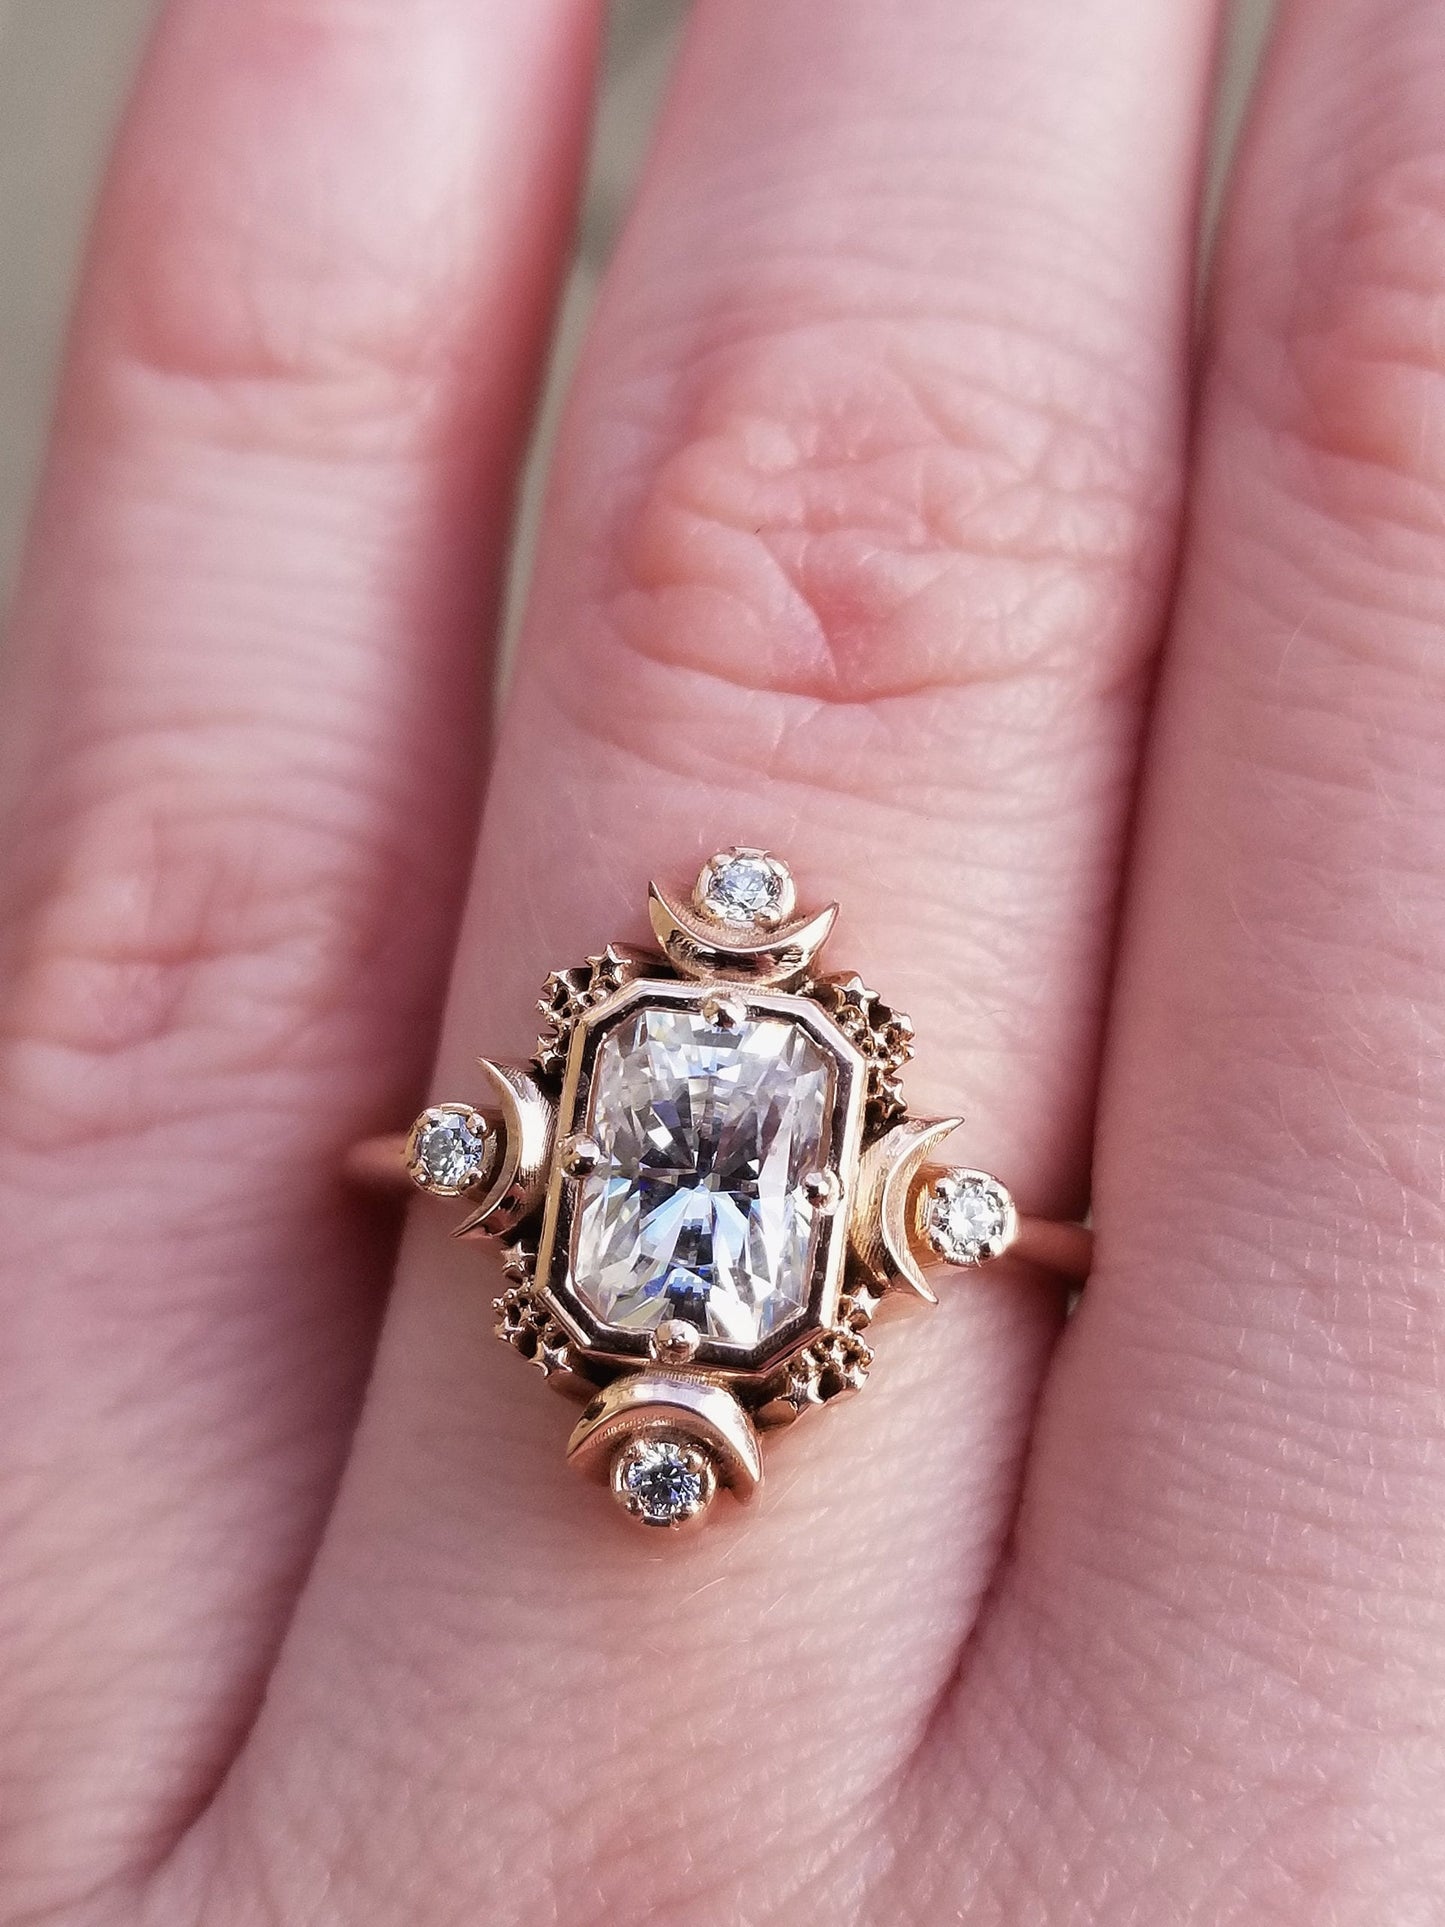 Emerald Cut Artemis Moon Engagement Ring with Radiant Cut Moissanite - Celestial Goddess Engagement